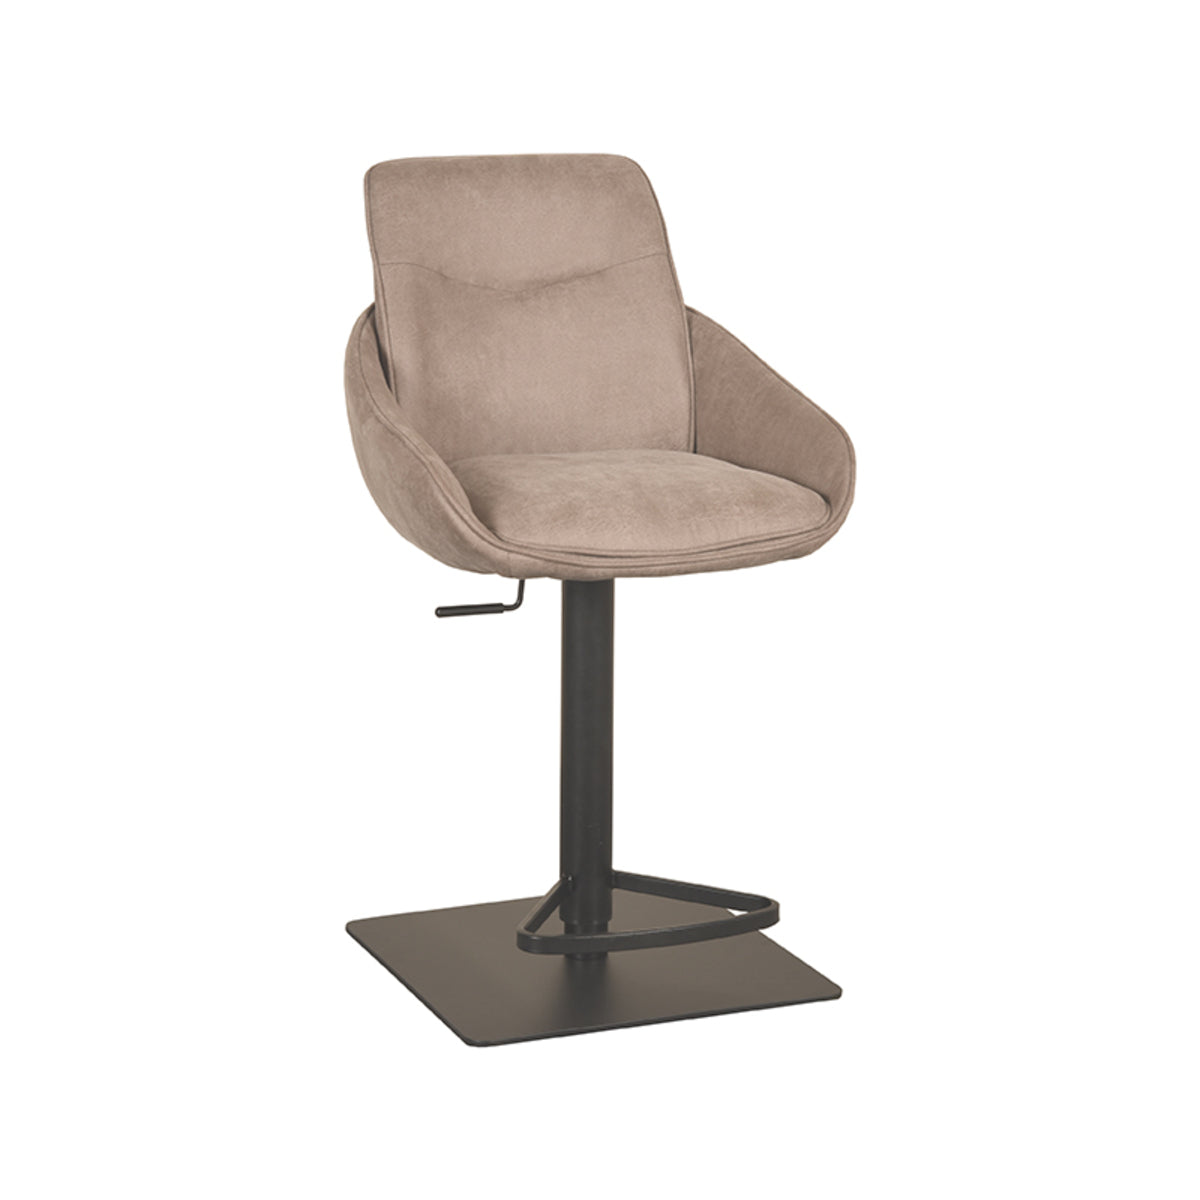 LABEL51 Bar stool Beauty - Taupe - Micro Suede